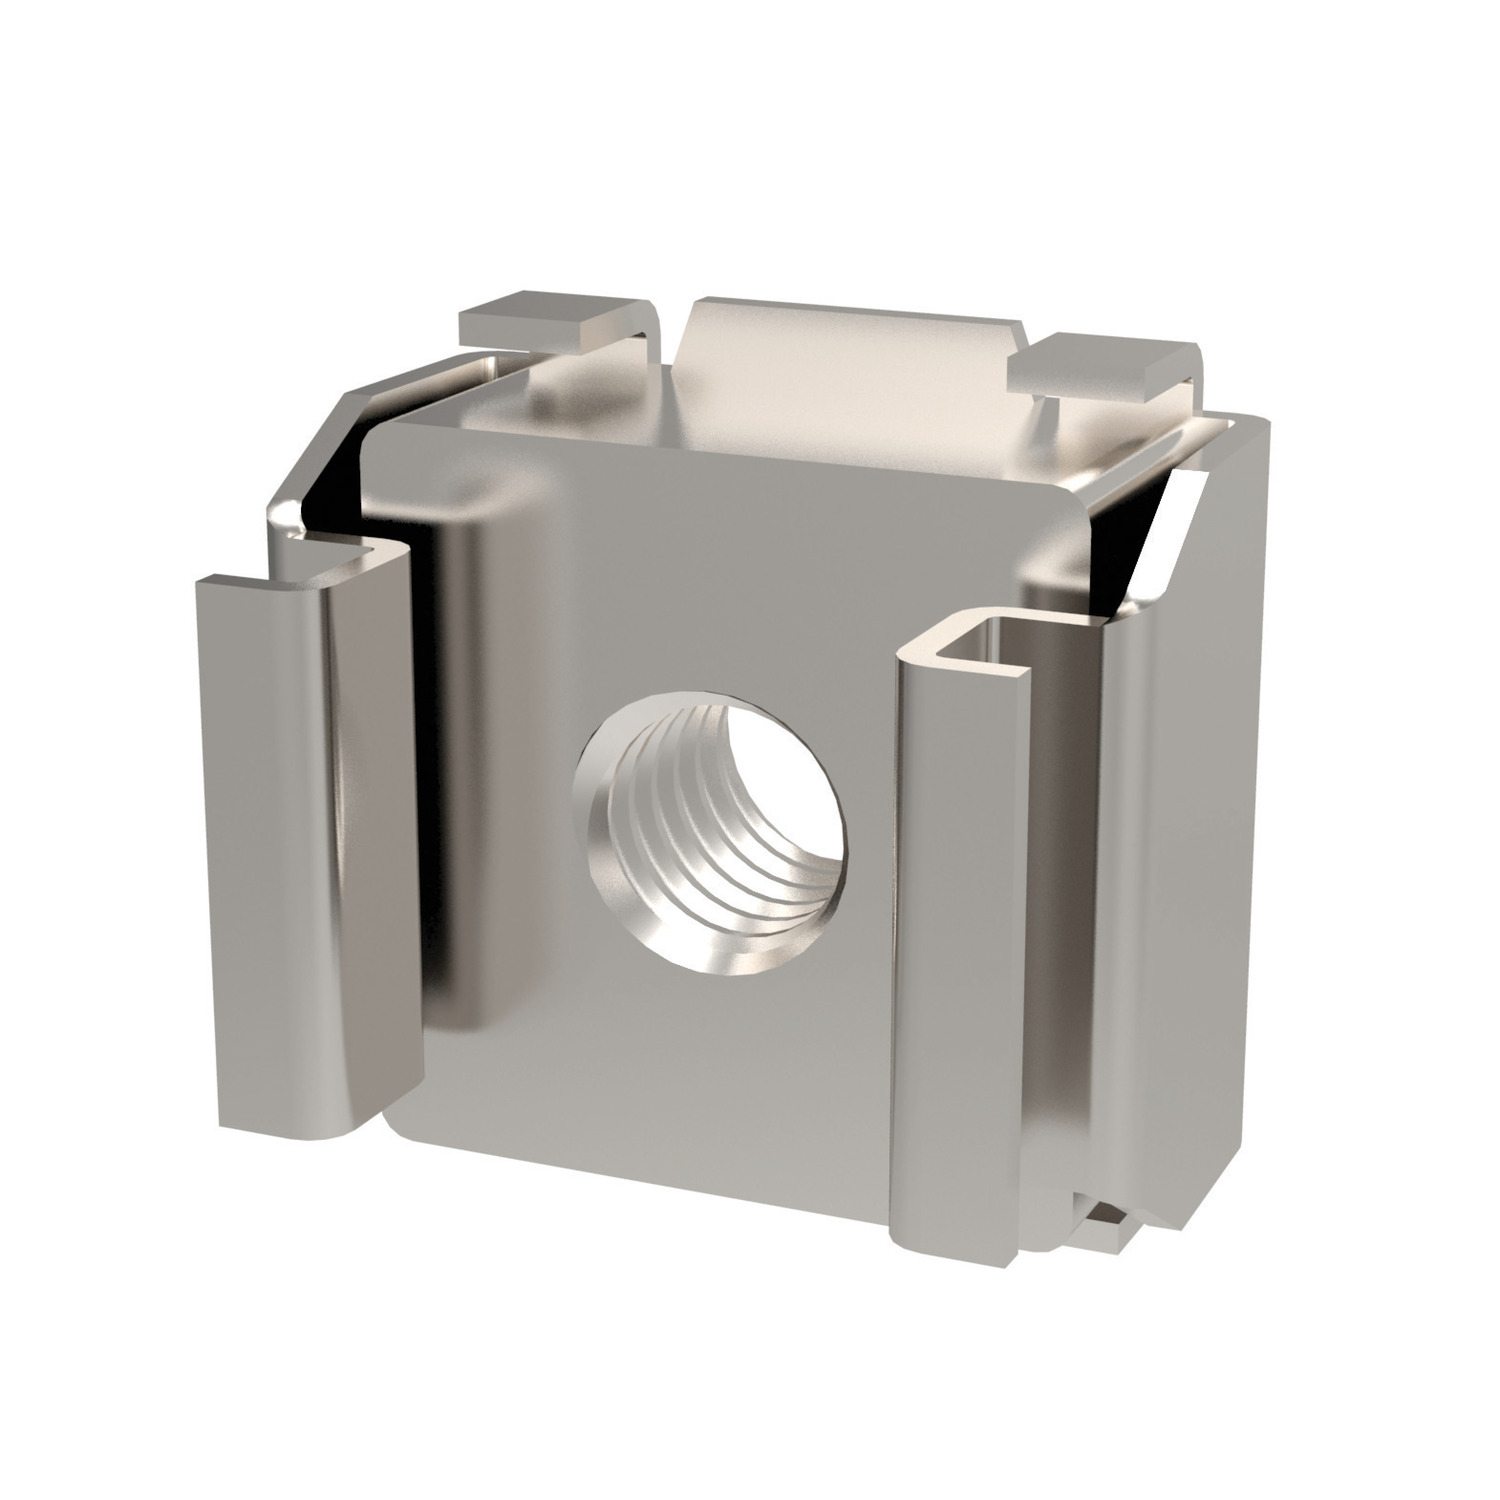 Cage Nuts Cage nuts manufactured in A2 stainless steel. Sizes range from M4 to M10. For panels up to 4,3.